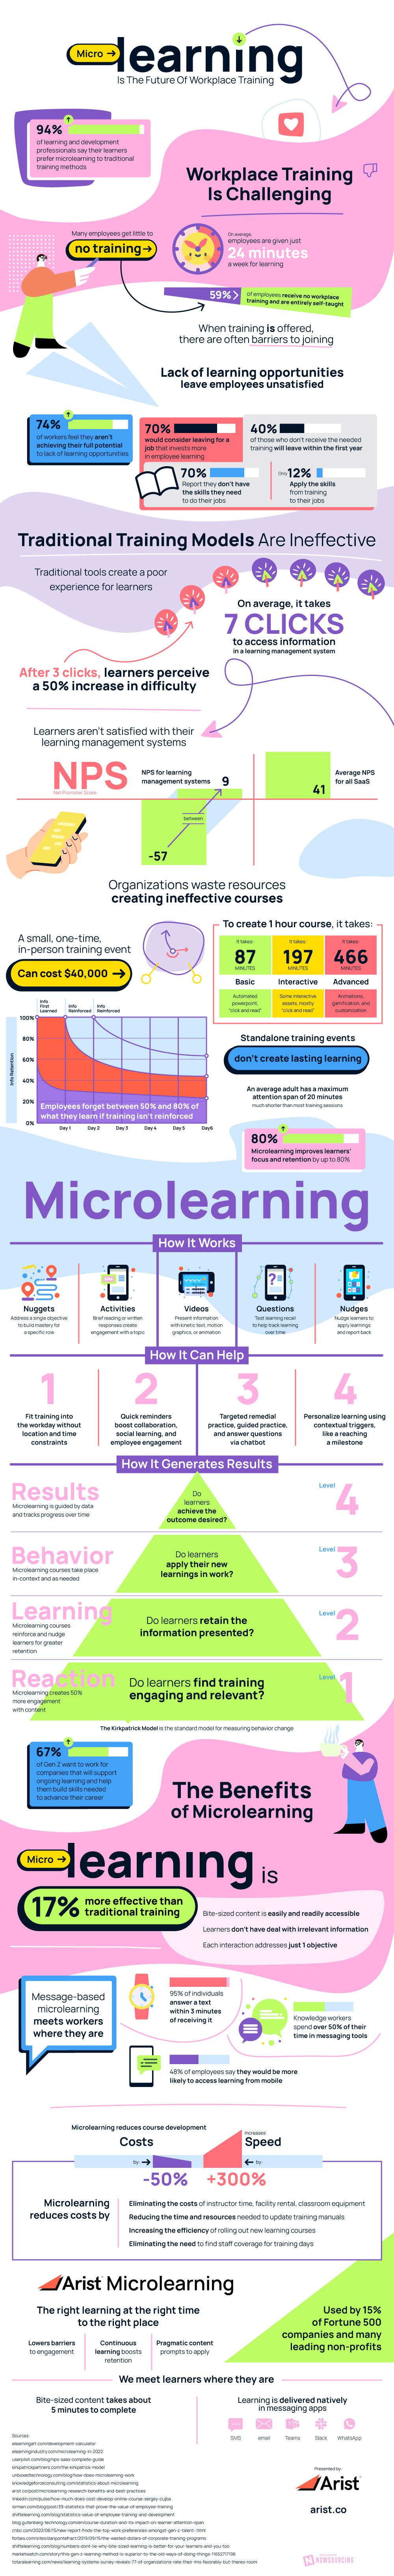 [infographic] 94% Learners Say They Prefer Microlearning Enhancing Workplace Training